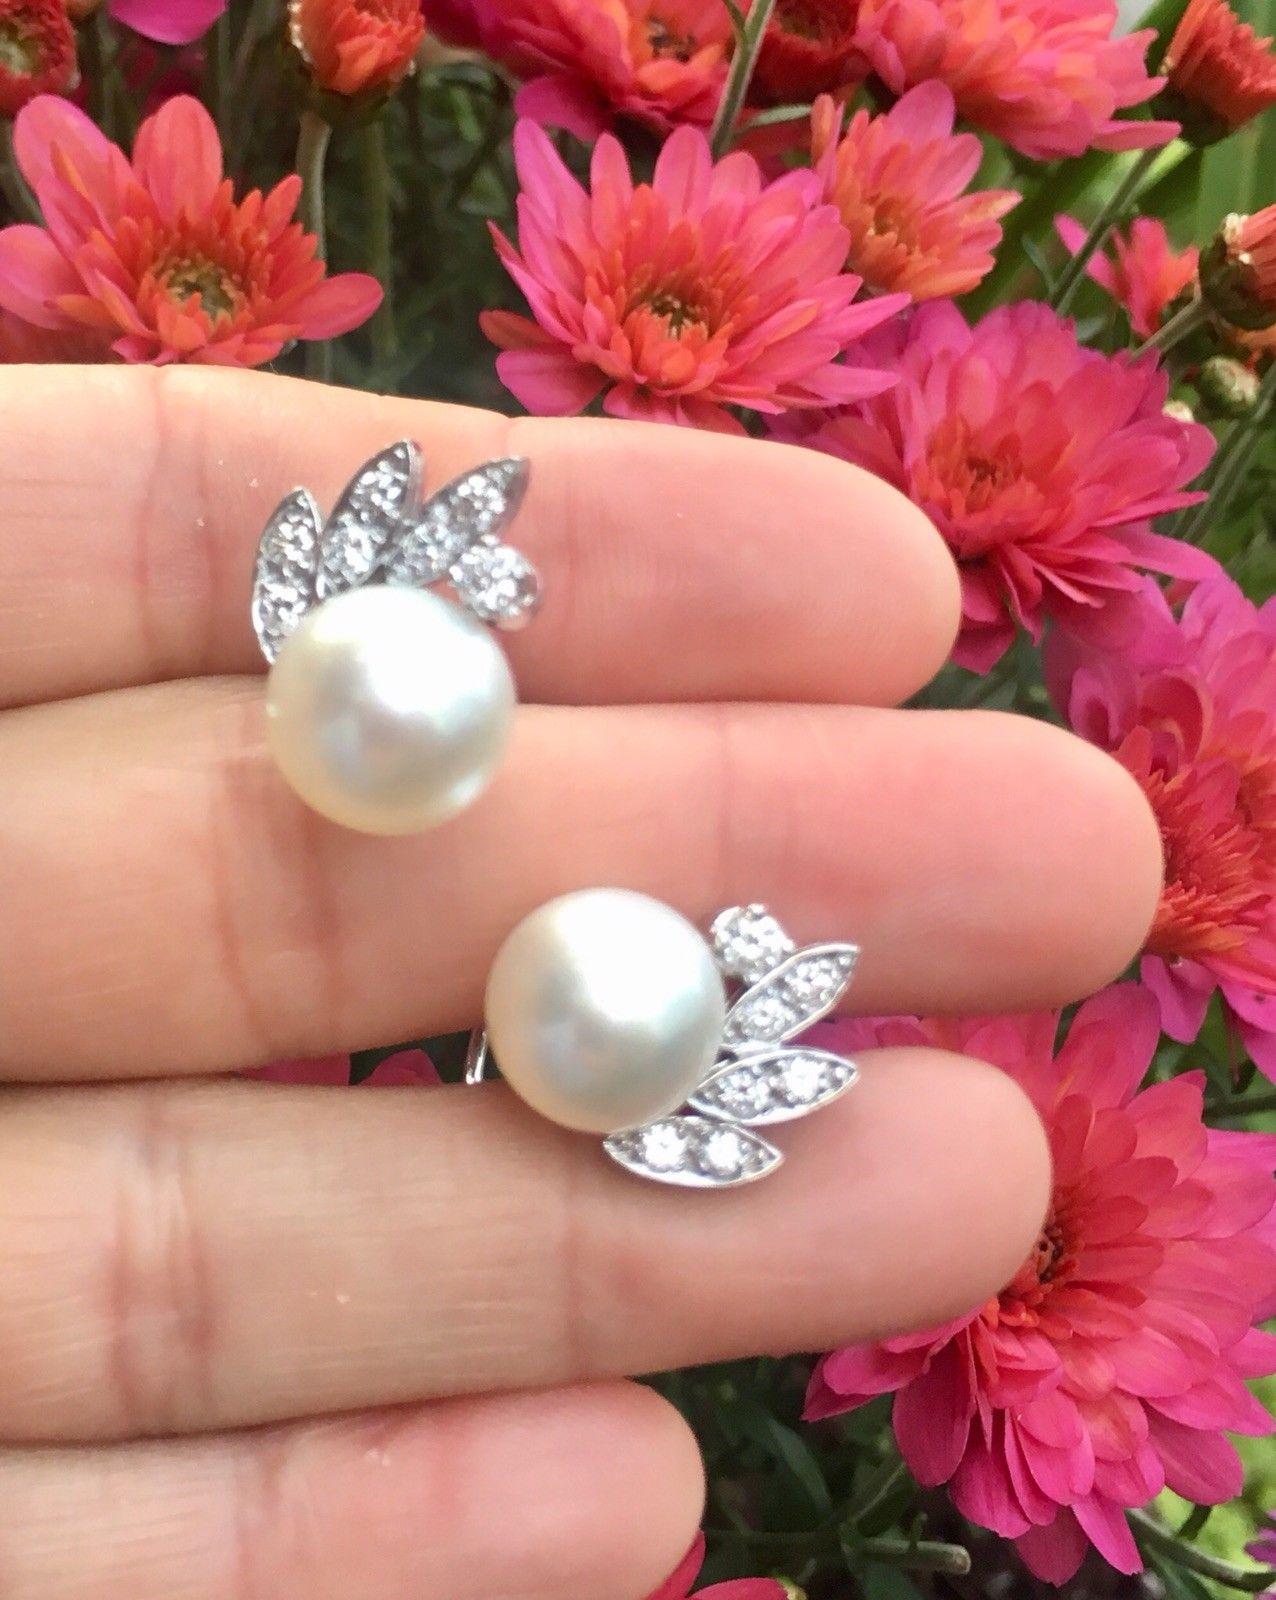 Stunning mid century 1950s 18 karat gold G VS brilliant diamond 11.7 mm cultured pearl earrings

The diamonds are beautiful 0.80 carats of G VS brilliant cuts , set in 18k gold (tested) surrounds featuring two approximately 11.7 mm pearls.

The